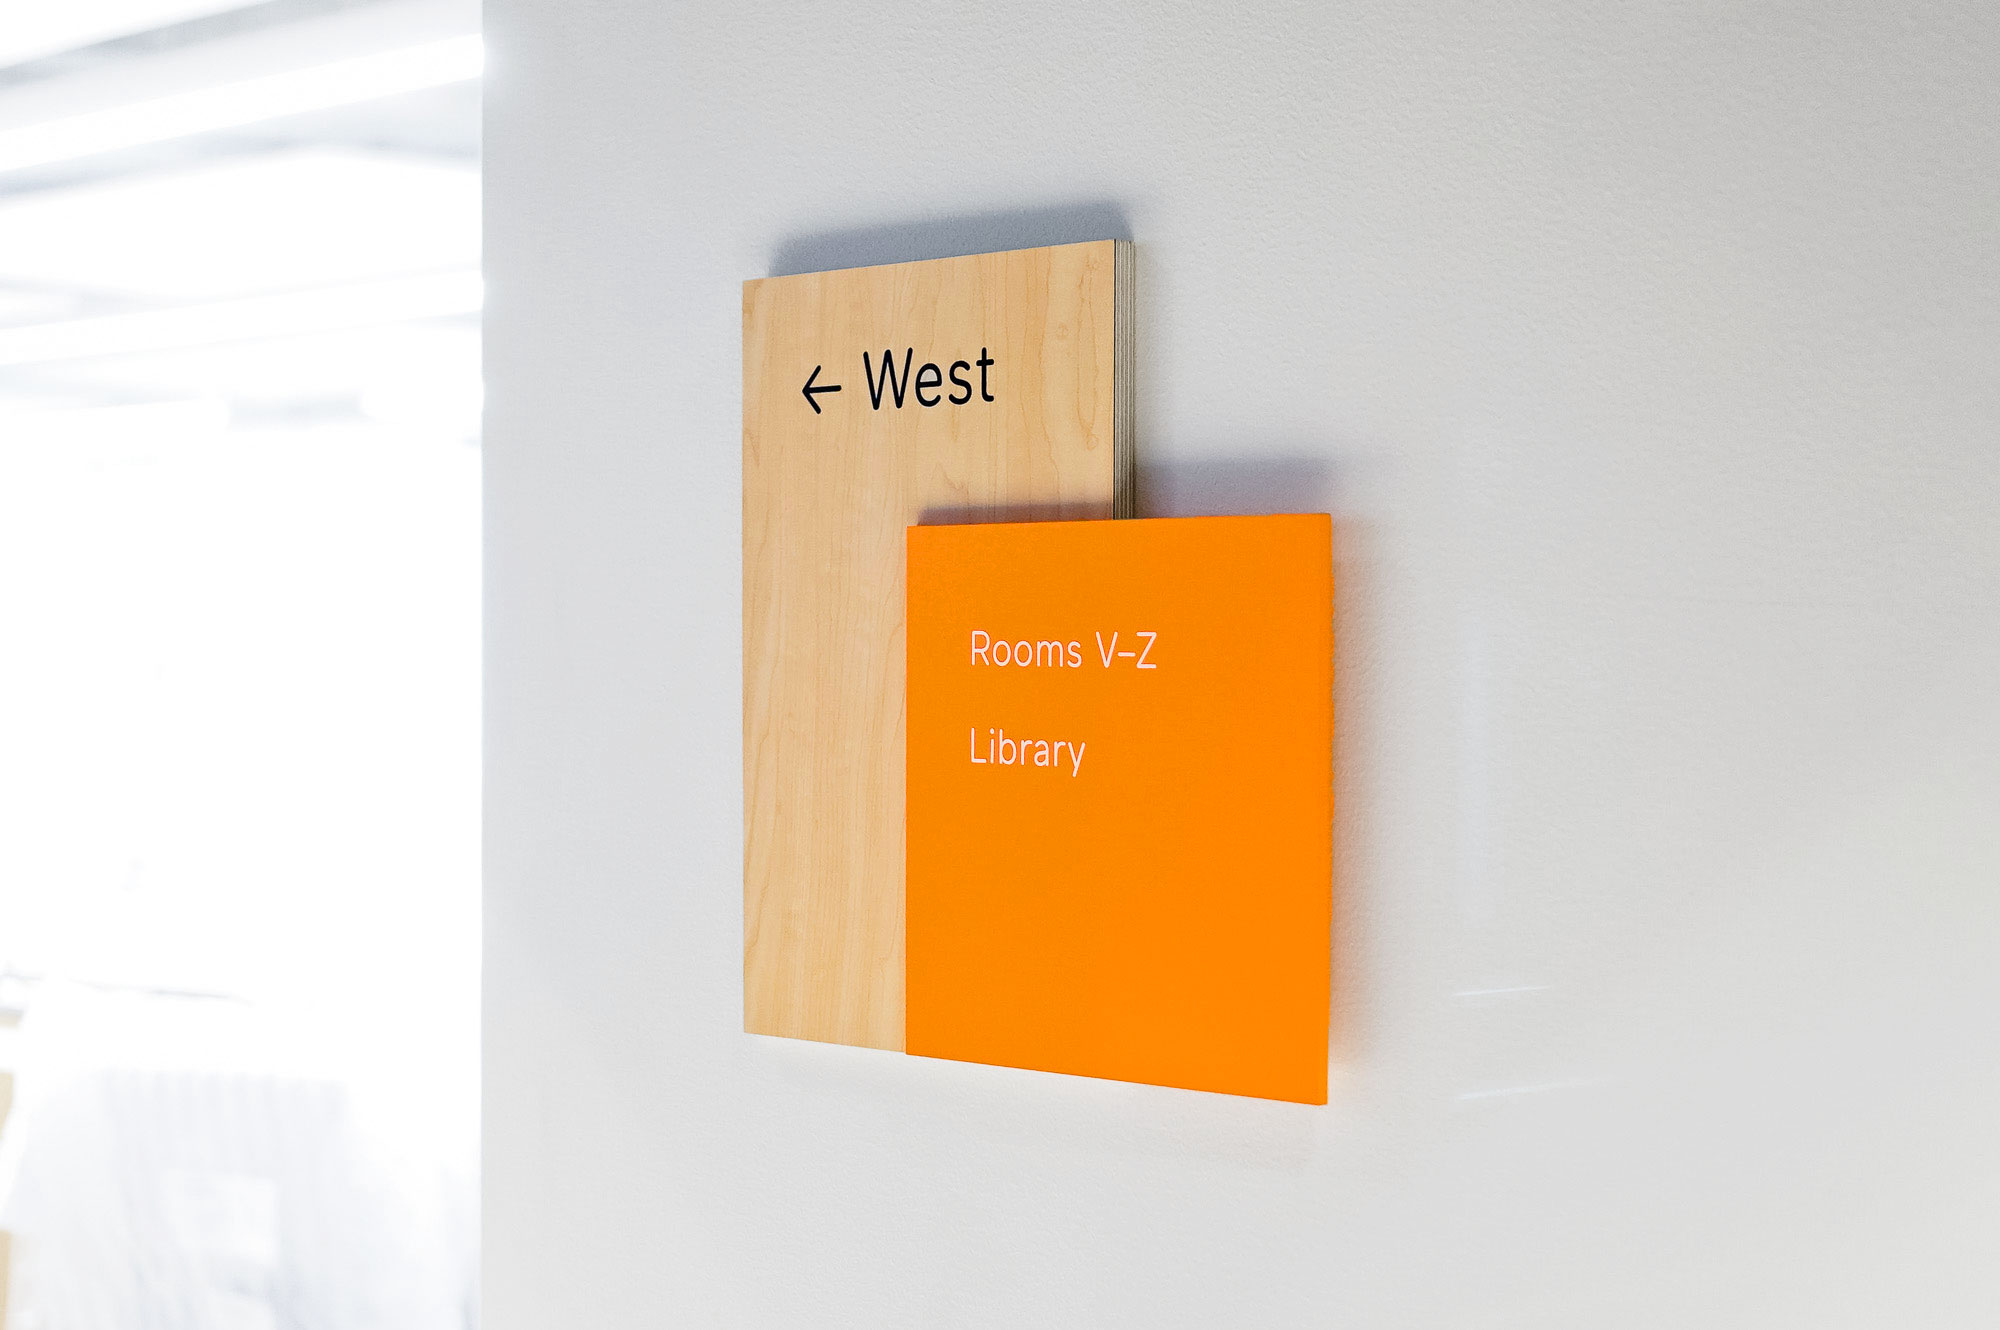 Modern light wood and colored wayfinding wall panels for Scale, a San Francisco based company delivering high quality training data for AI applications such as self-driving cars, mapping, AR/VR, robotics, and more.